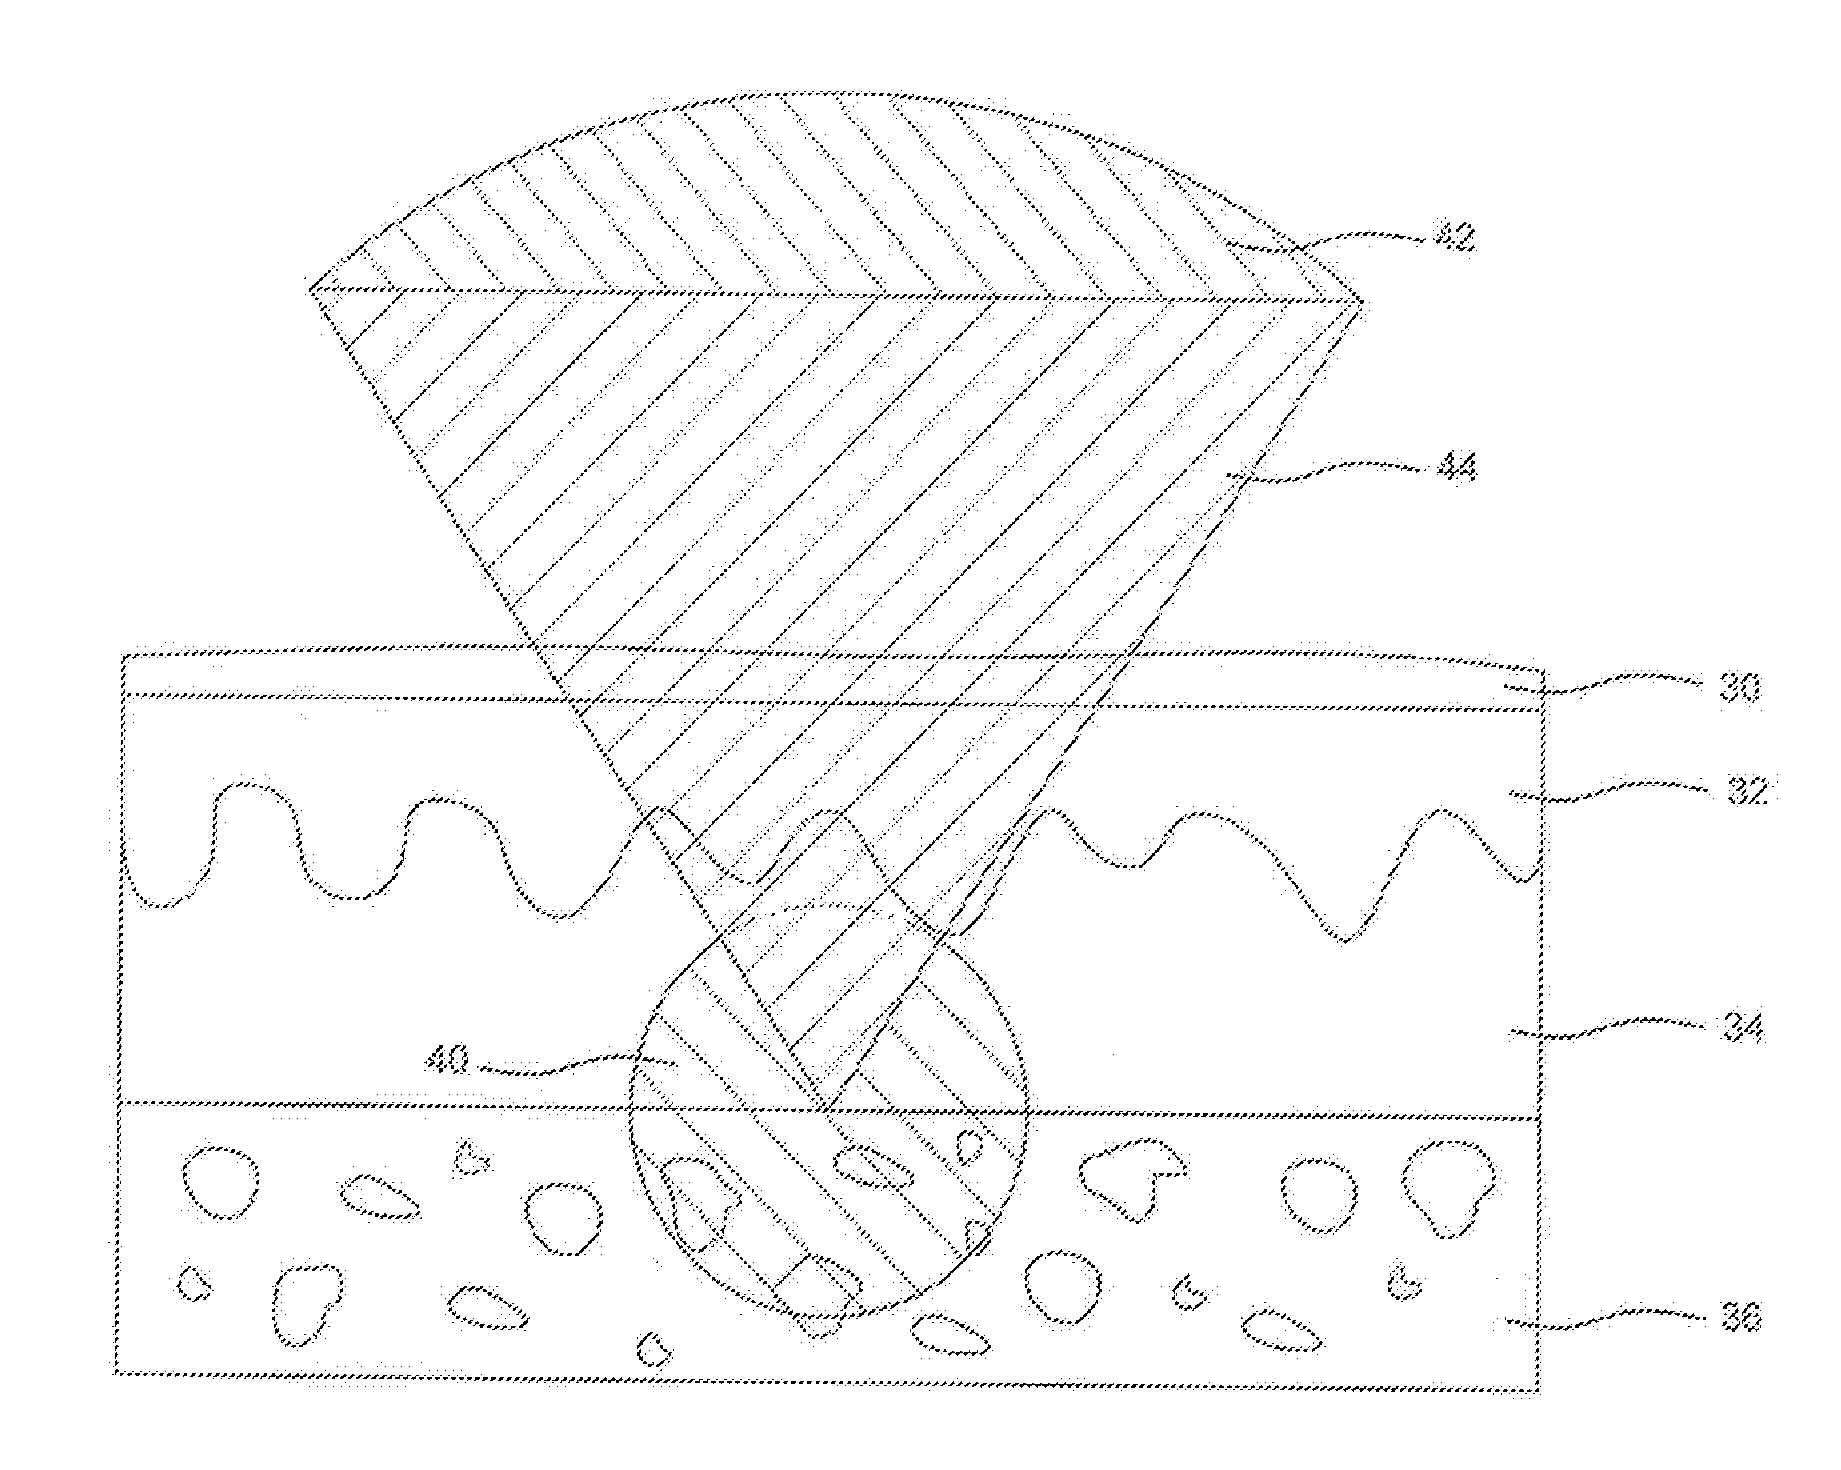 Medical treatment apparatus with laser pulses in the femtosecond range